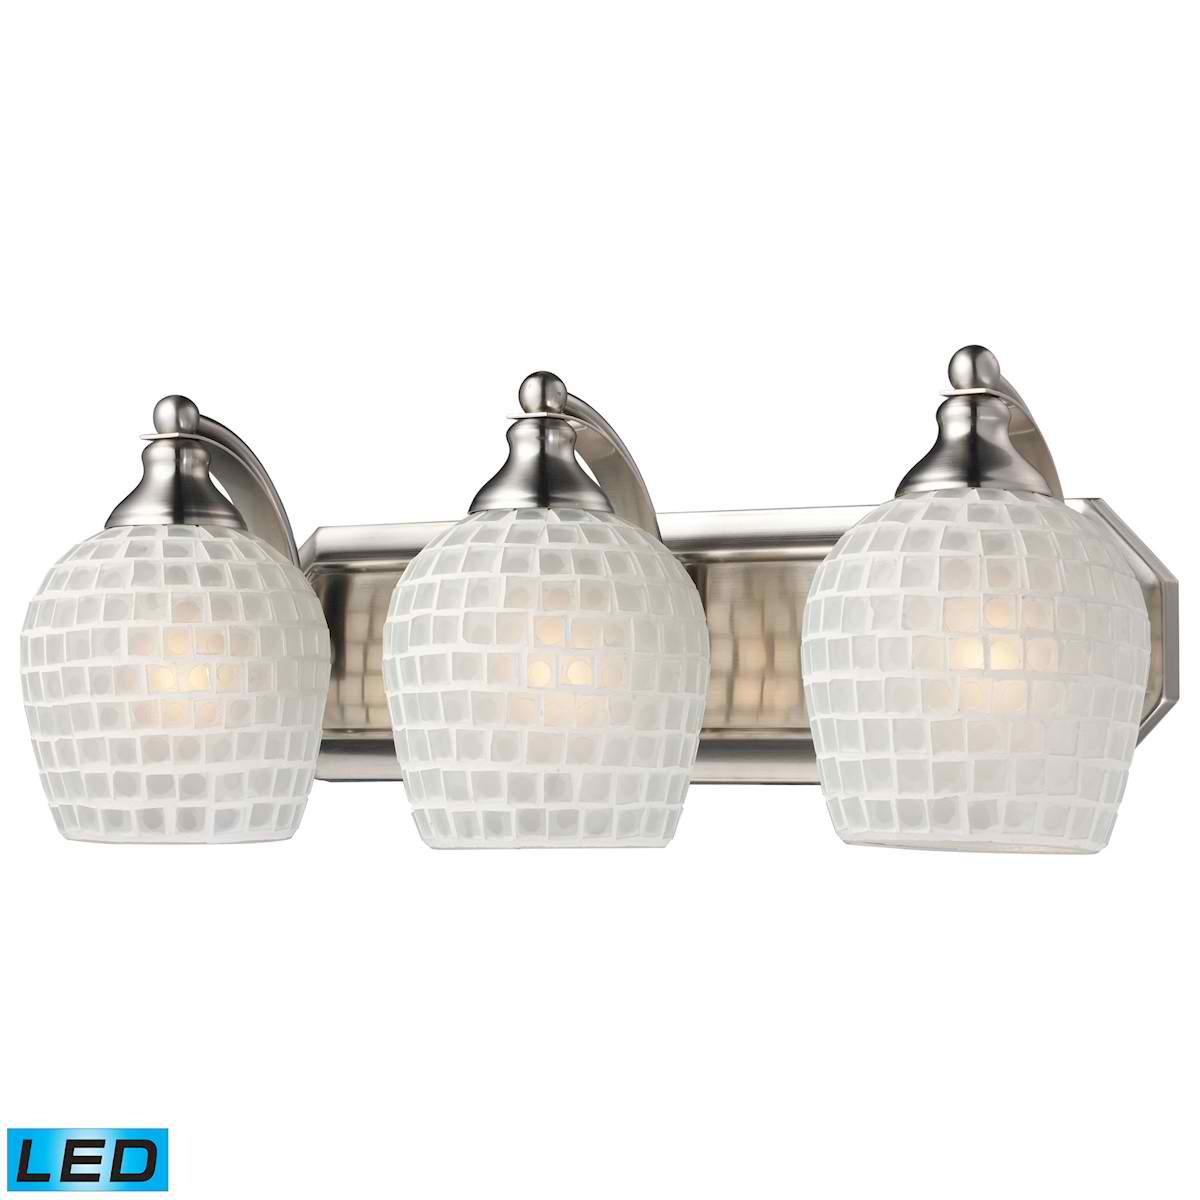 3 Light Vanity in Satin Nickel and White Mosaic Glass - LED, 800 Lumens (2400 Lumens Total) with Full Scale